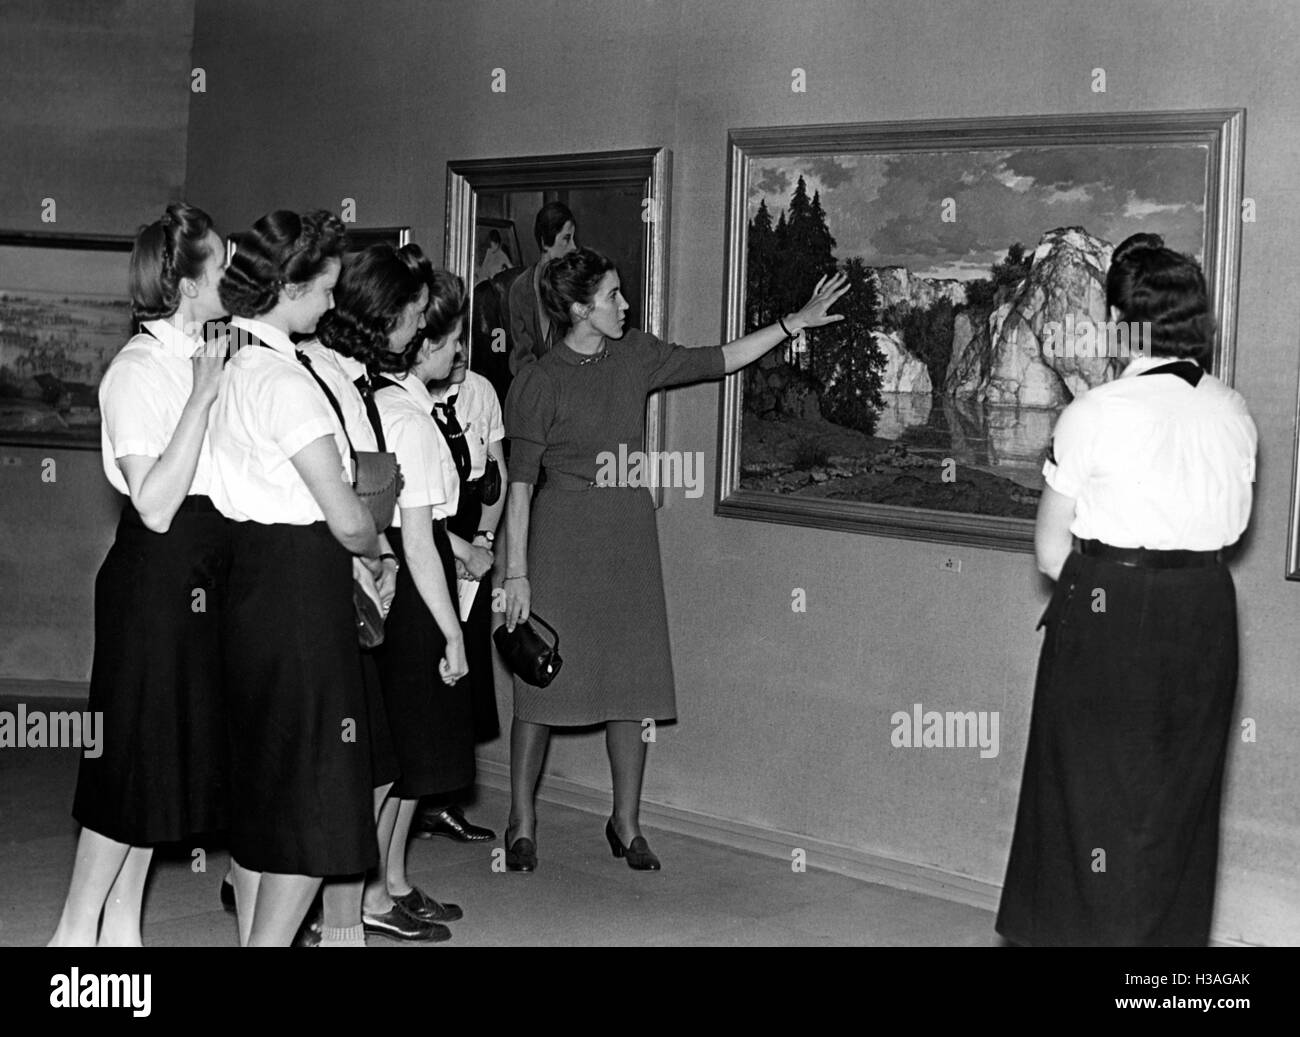 Members of the BDM-Werk Glaube und Schoenheit (BDM-Work, Faith and Beauty Society) visiting an art exhibition,1941 Stock Photo